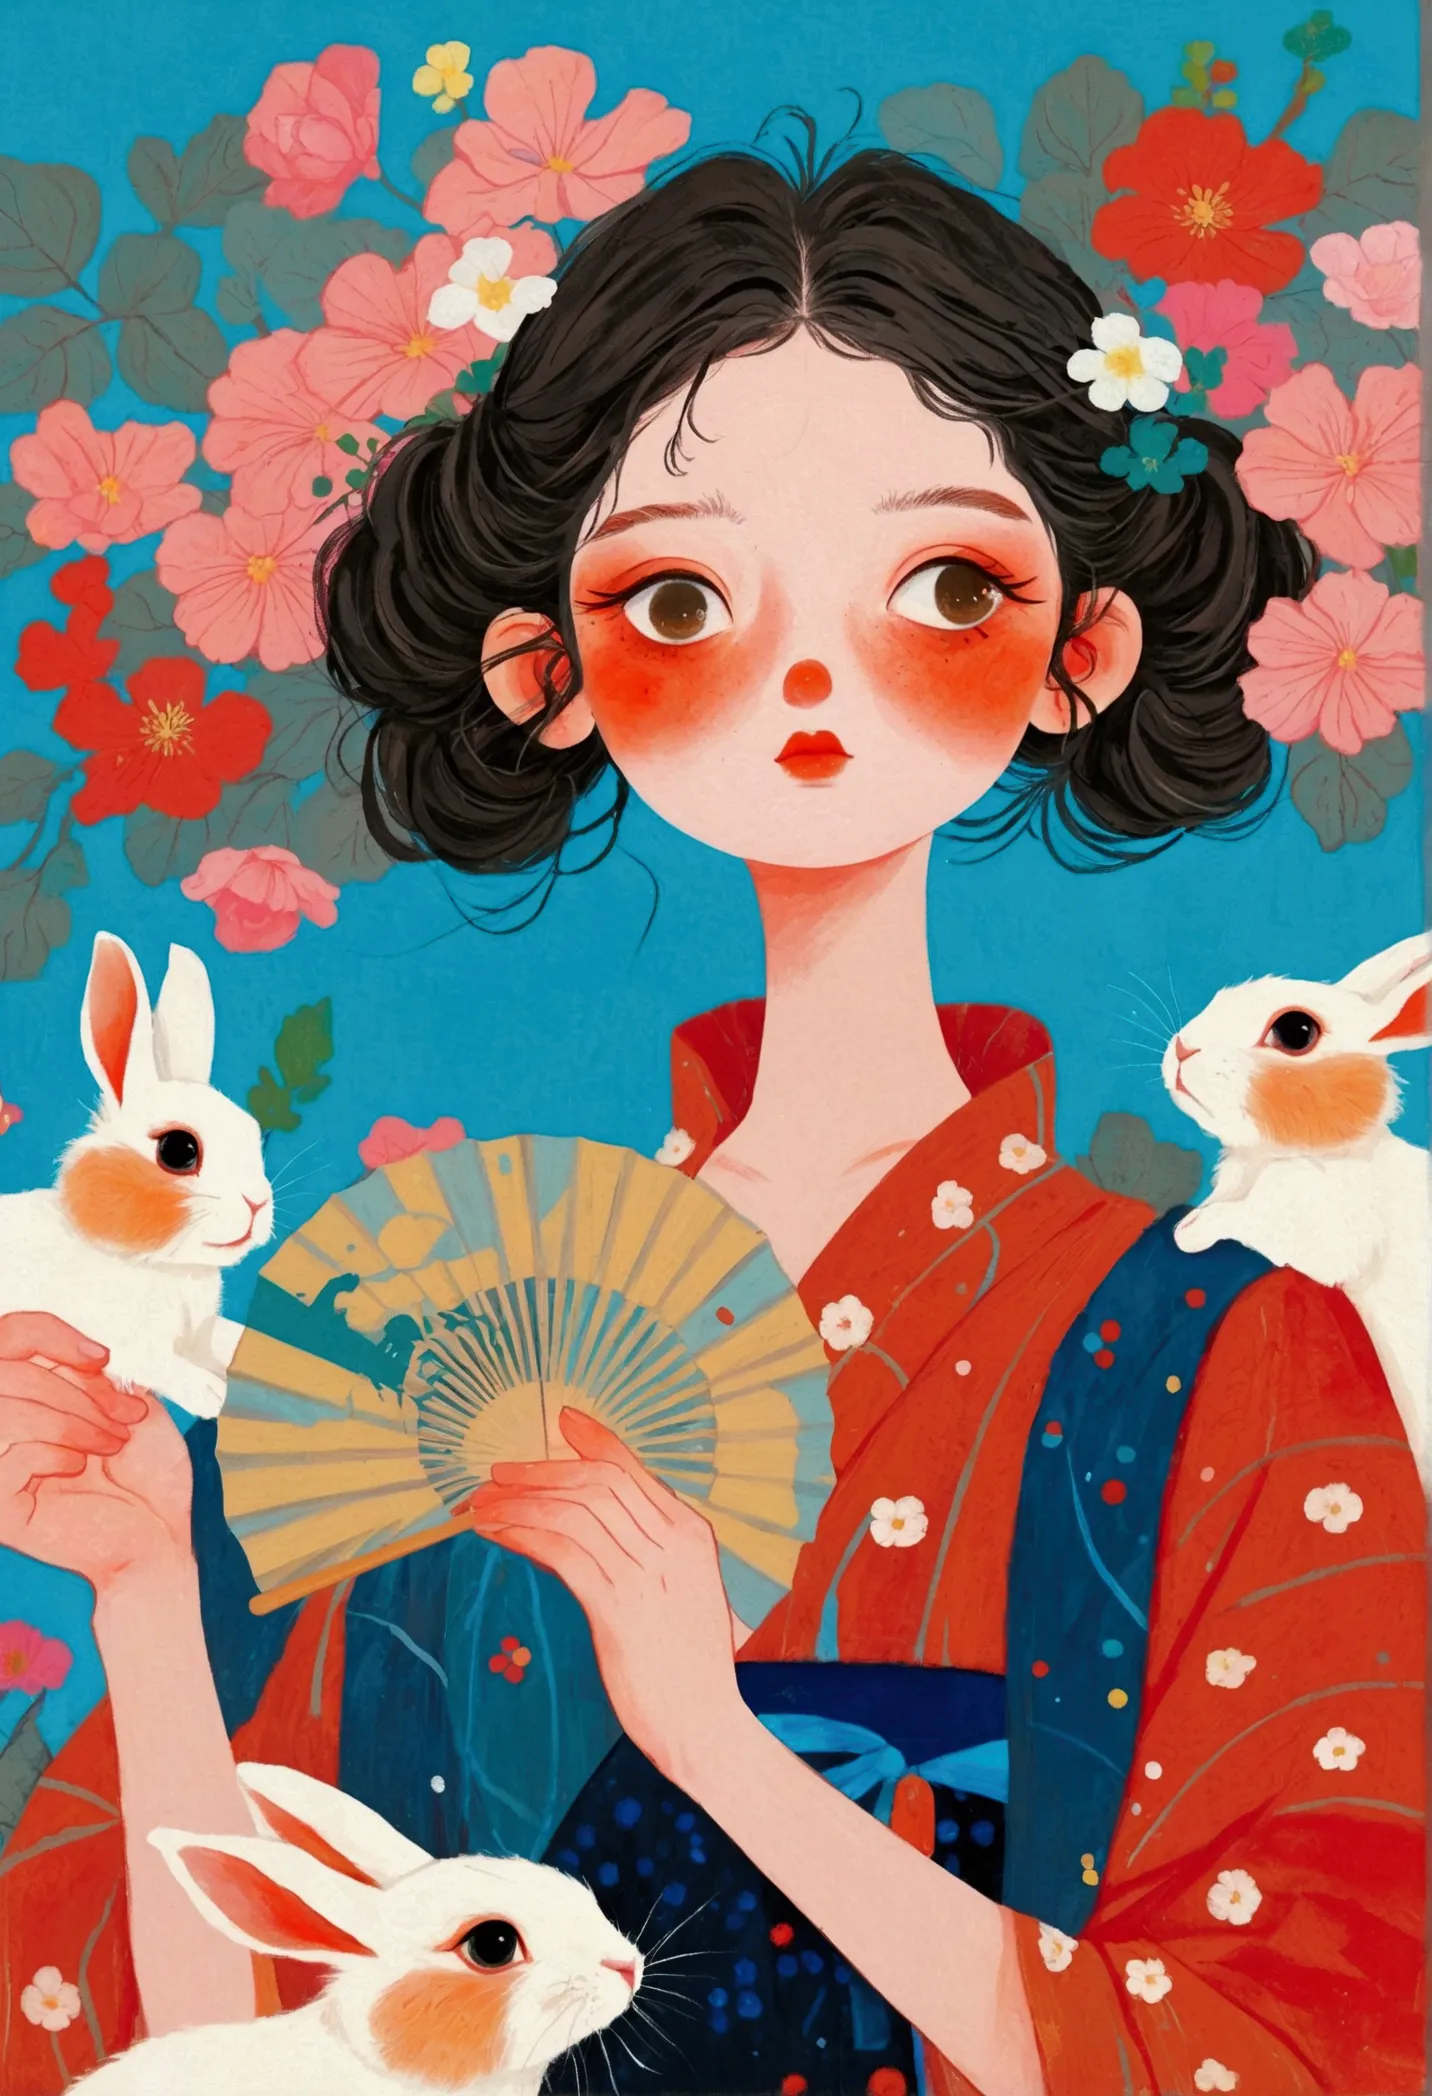 The painting shows a woman and two rabbits，Holding a fan and a fan in hand, James Jean (James Jean) Inspired by the extremely de...